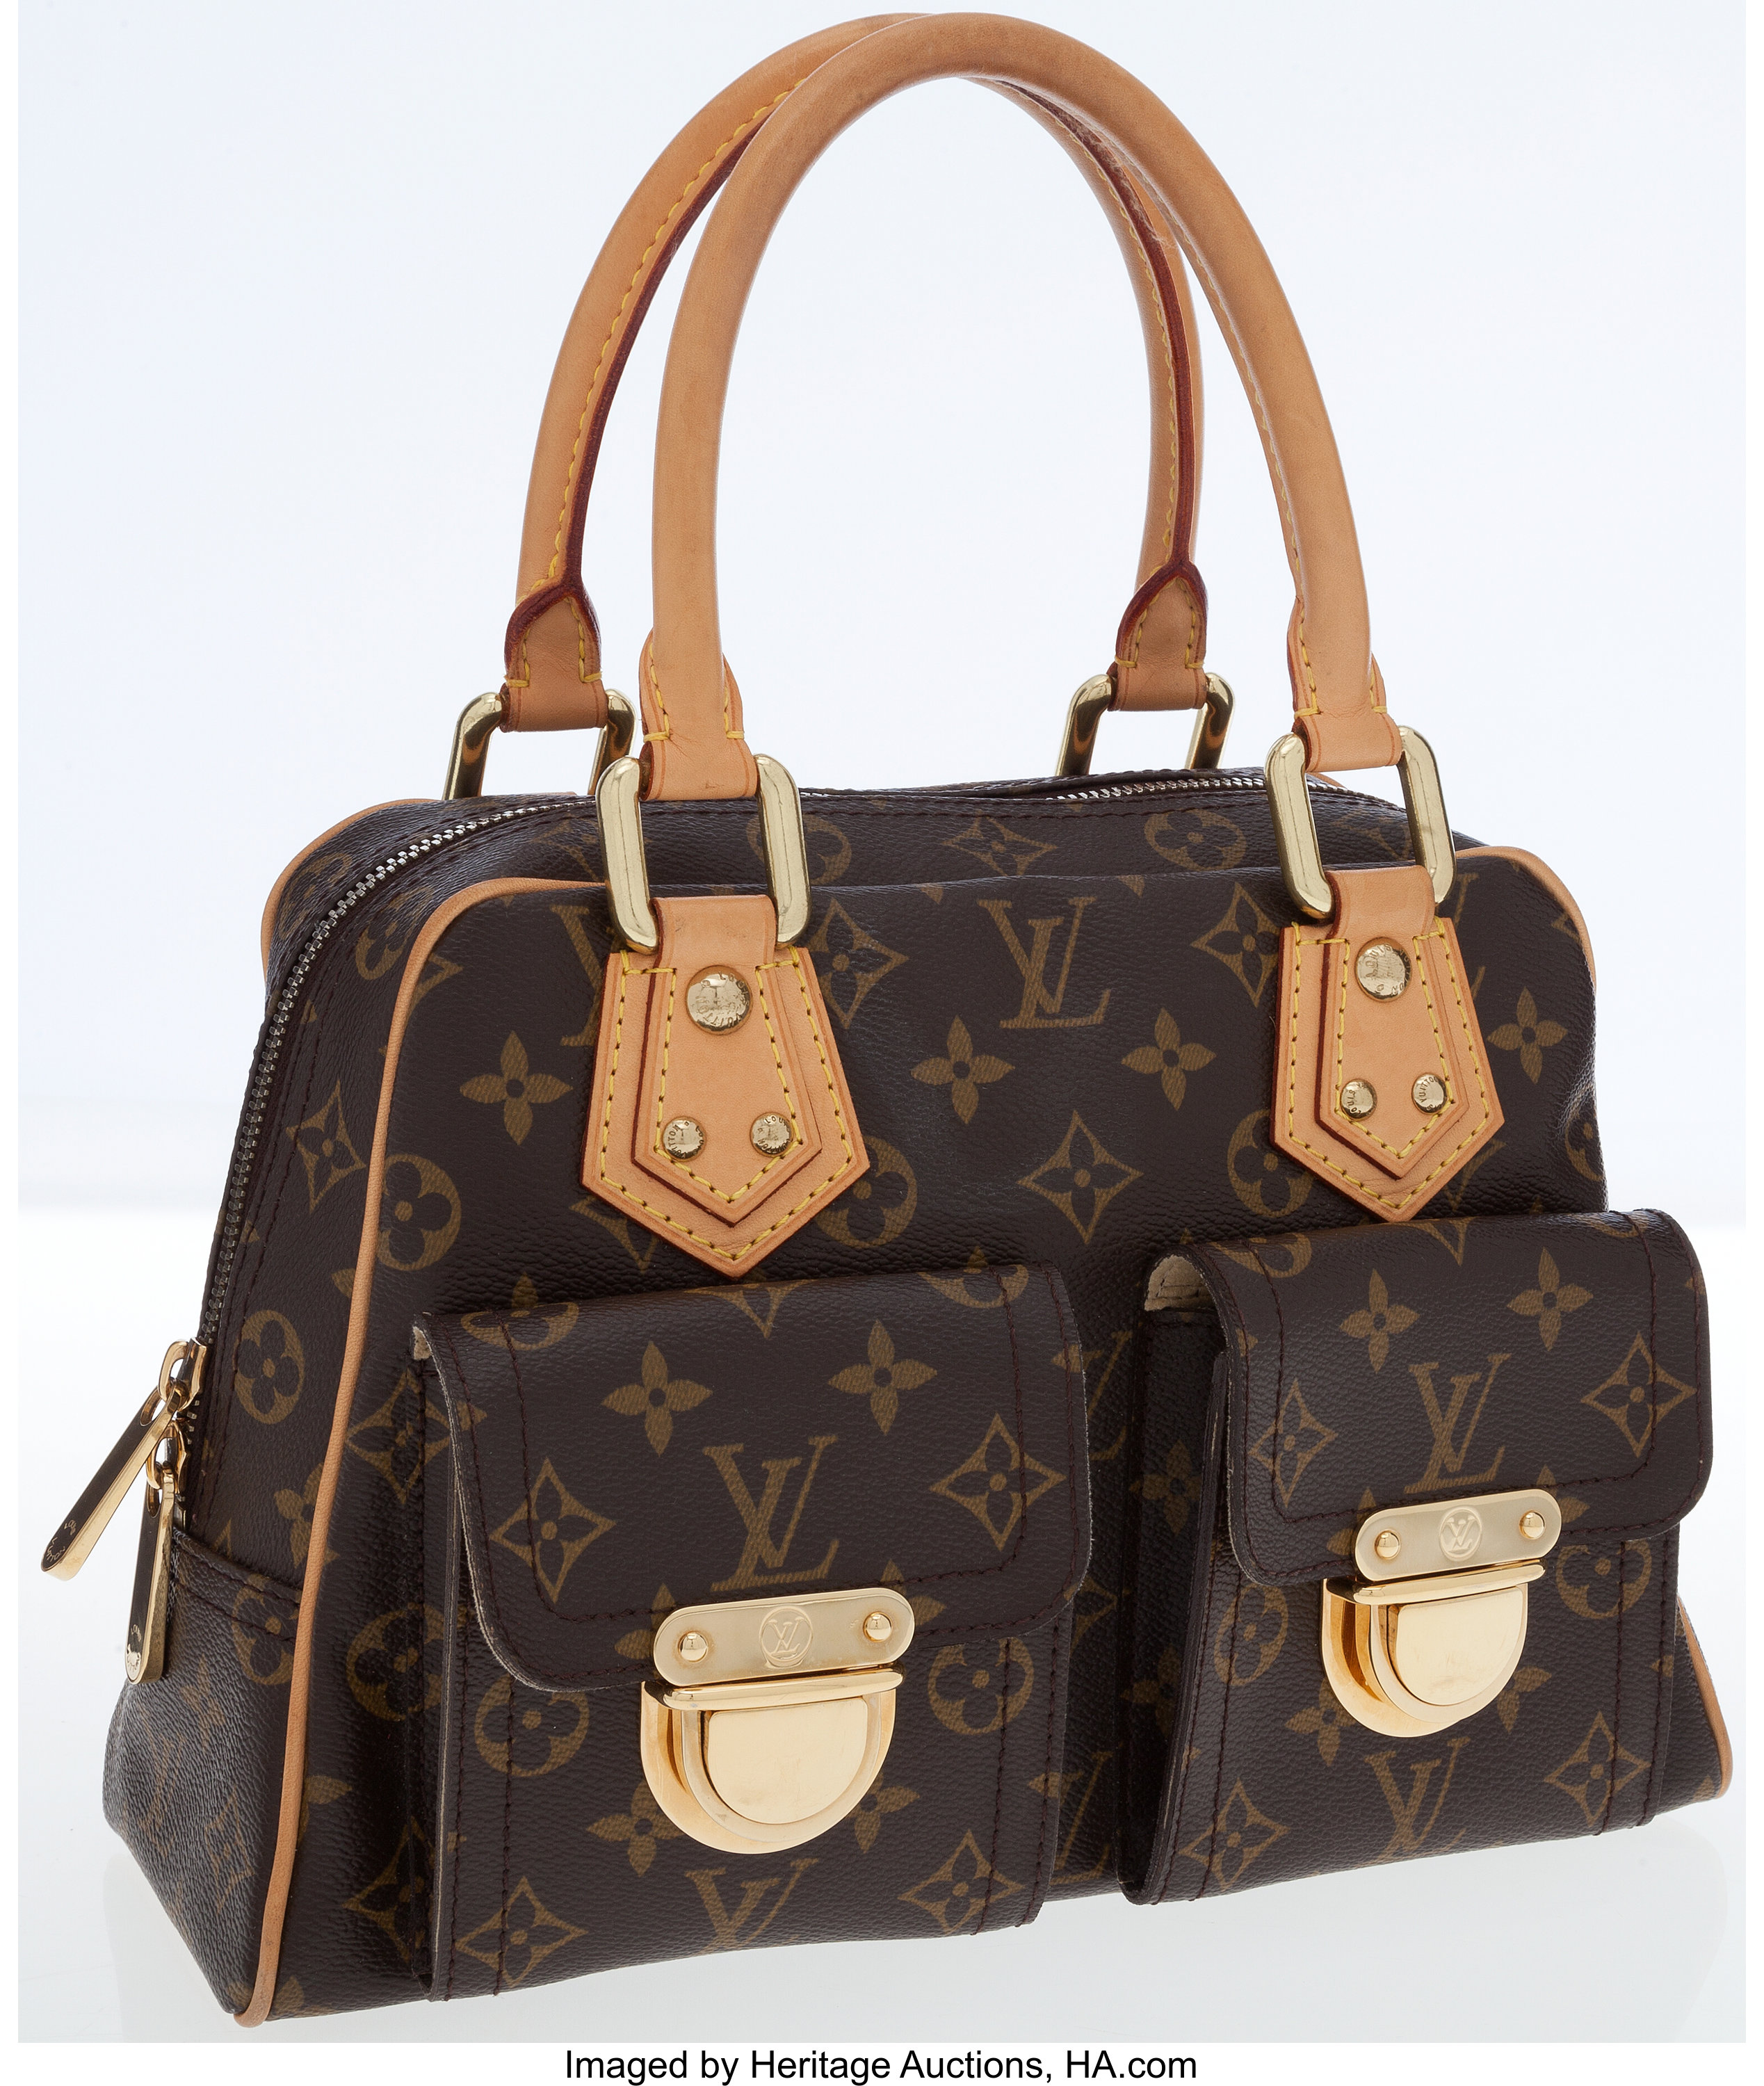 Lot - In the Style of & Marked Louis Vuitton: Black & Brown Monogram Print  Handbag with Tan Handles, Size: 25 x 35 cm. (9.84 x 13.78 in.), Handle  Length: 42 cm. (16.54 in.)